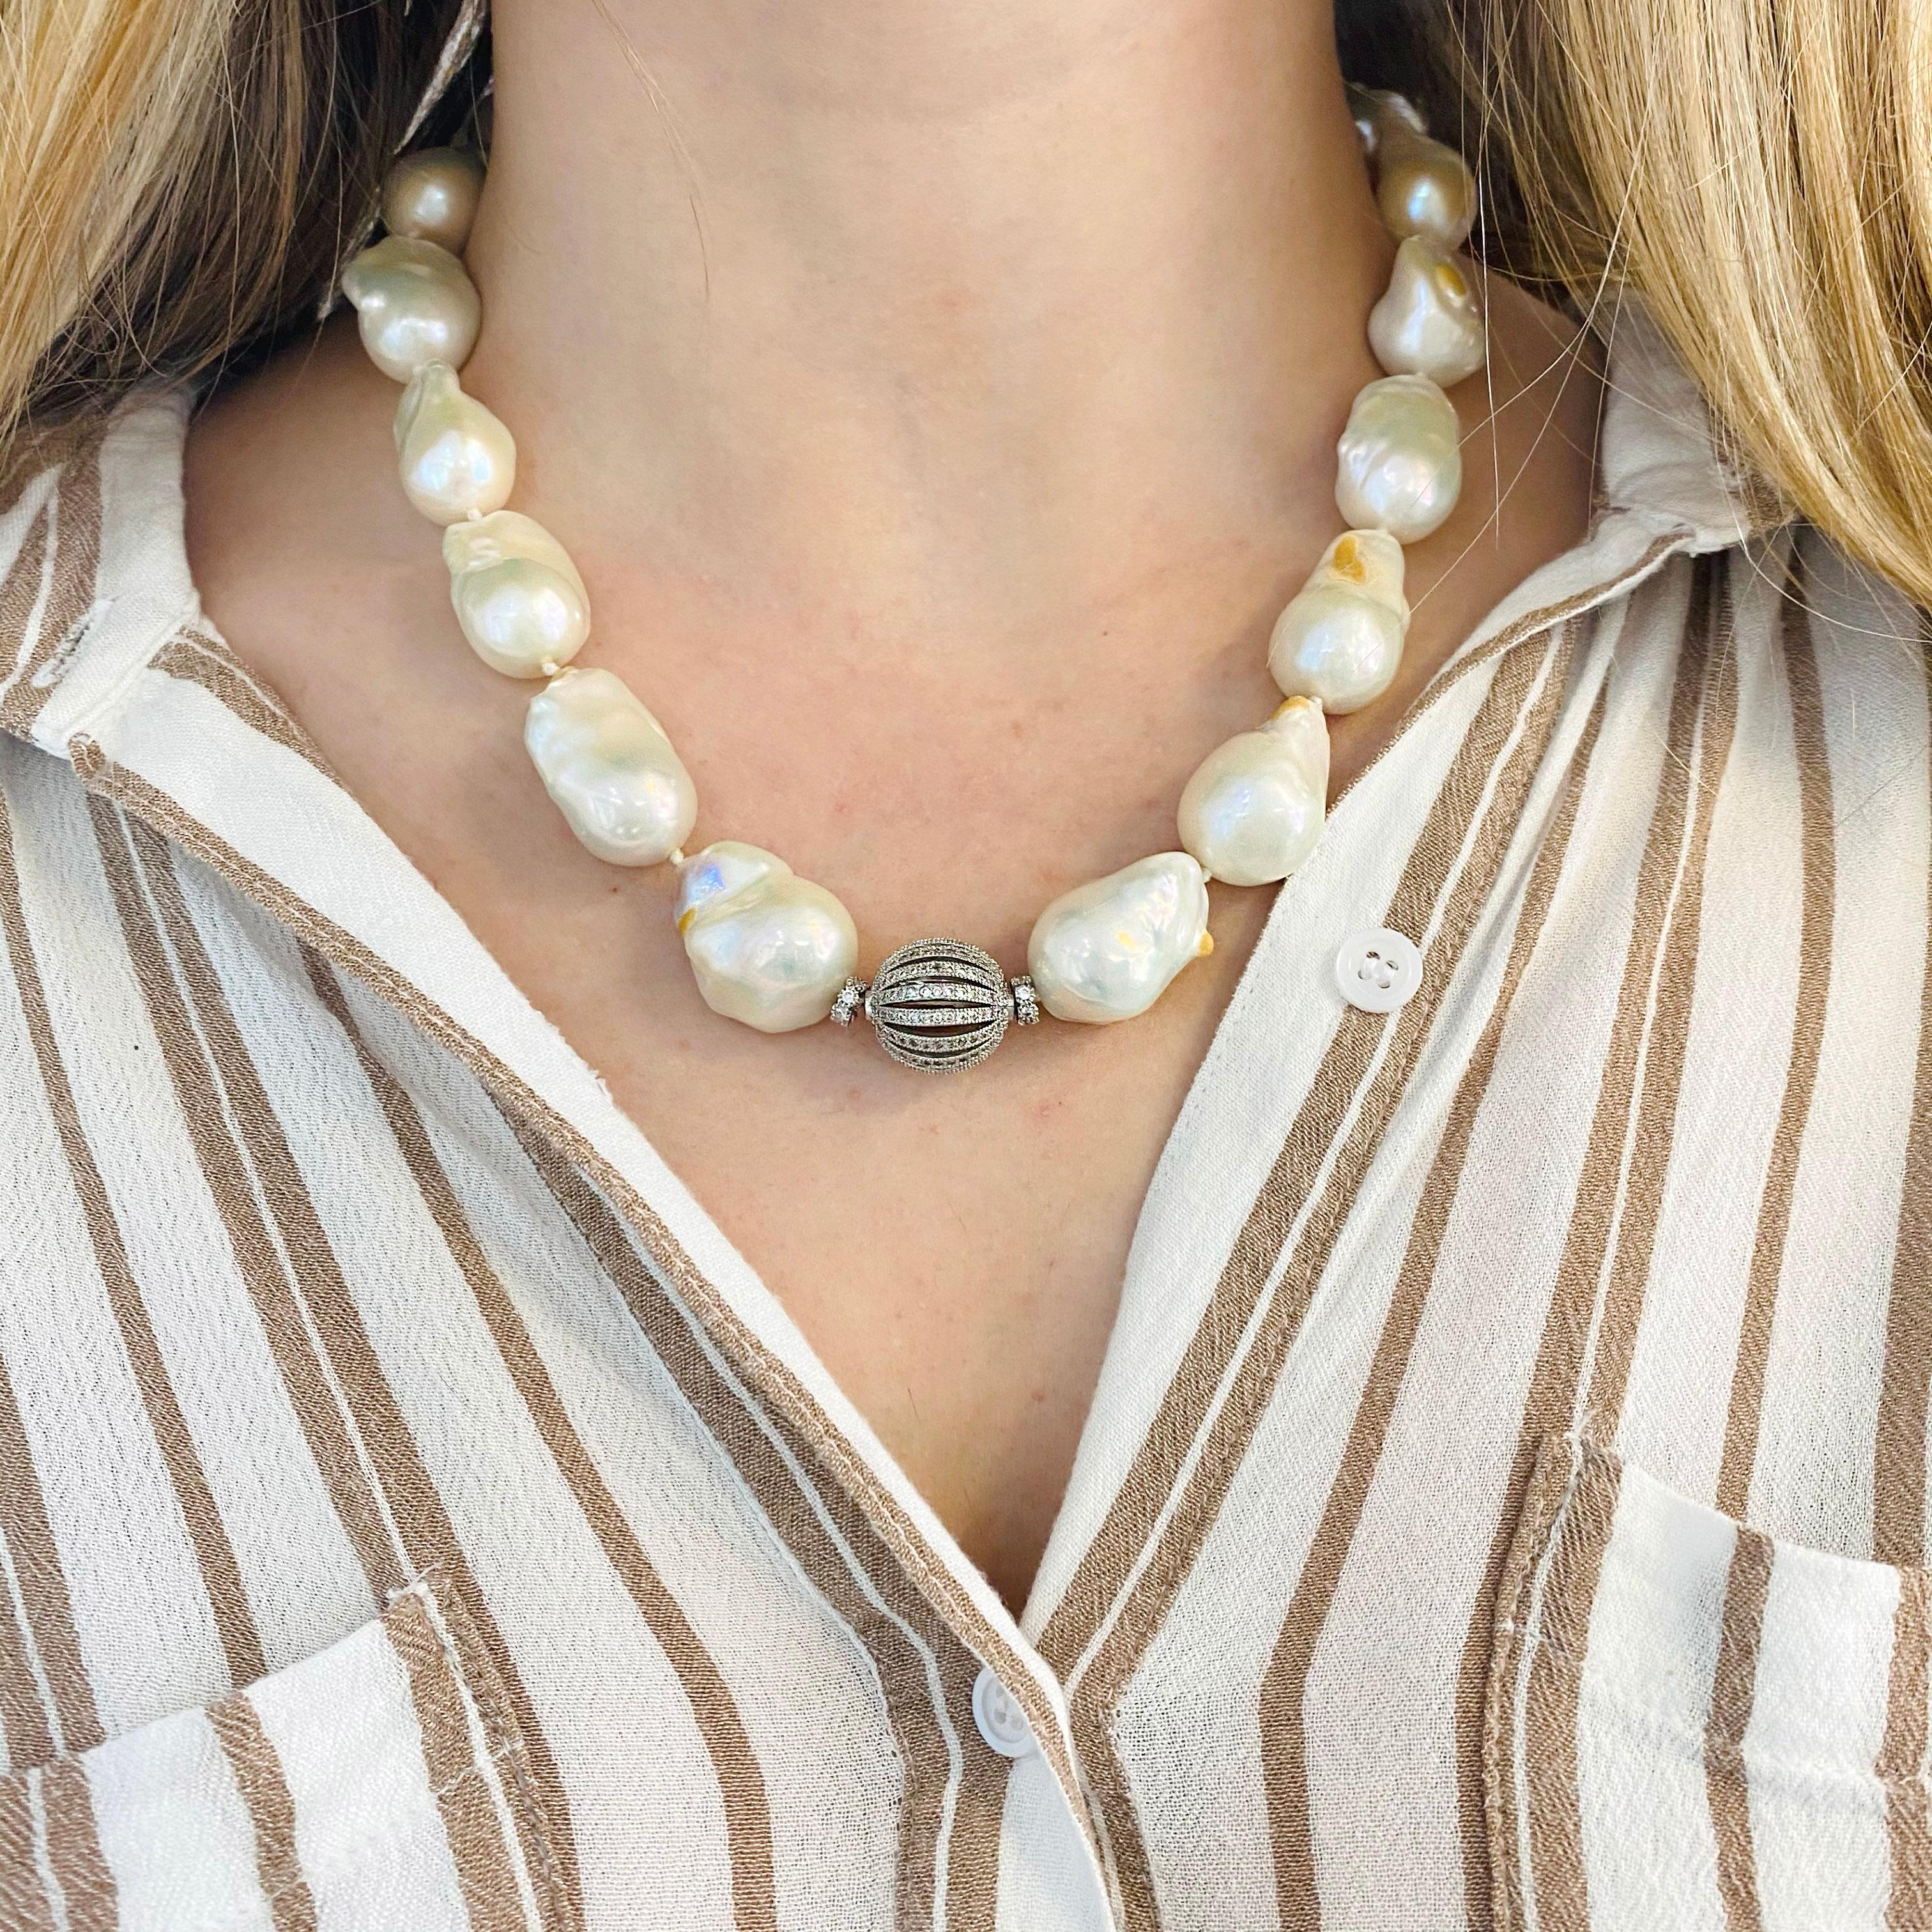 These baroque Tahitian pearls are white in color and knotted between each with a sterling silver adjustable chain and clasp.  The pearls are large 20 x 12 millimeters and make a great statement piece!  Each pearl is unique in shape with varied nacre